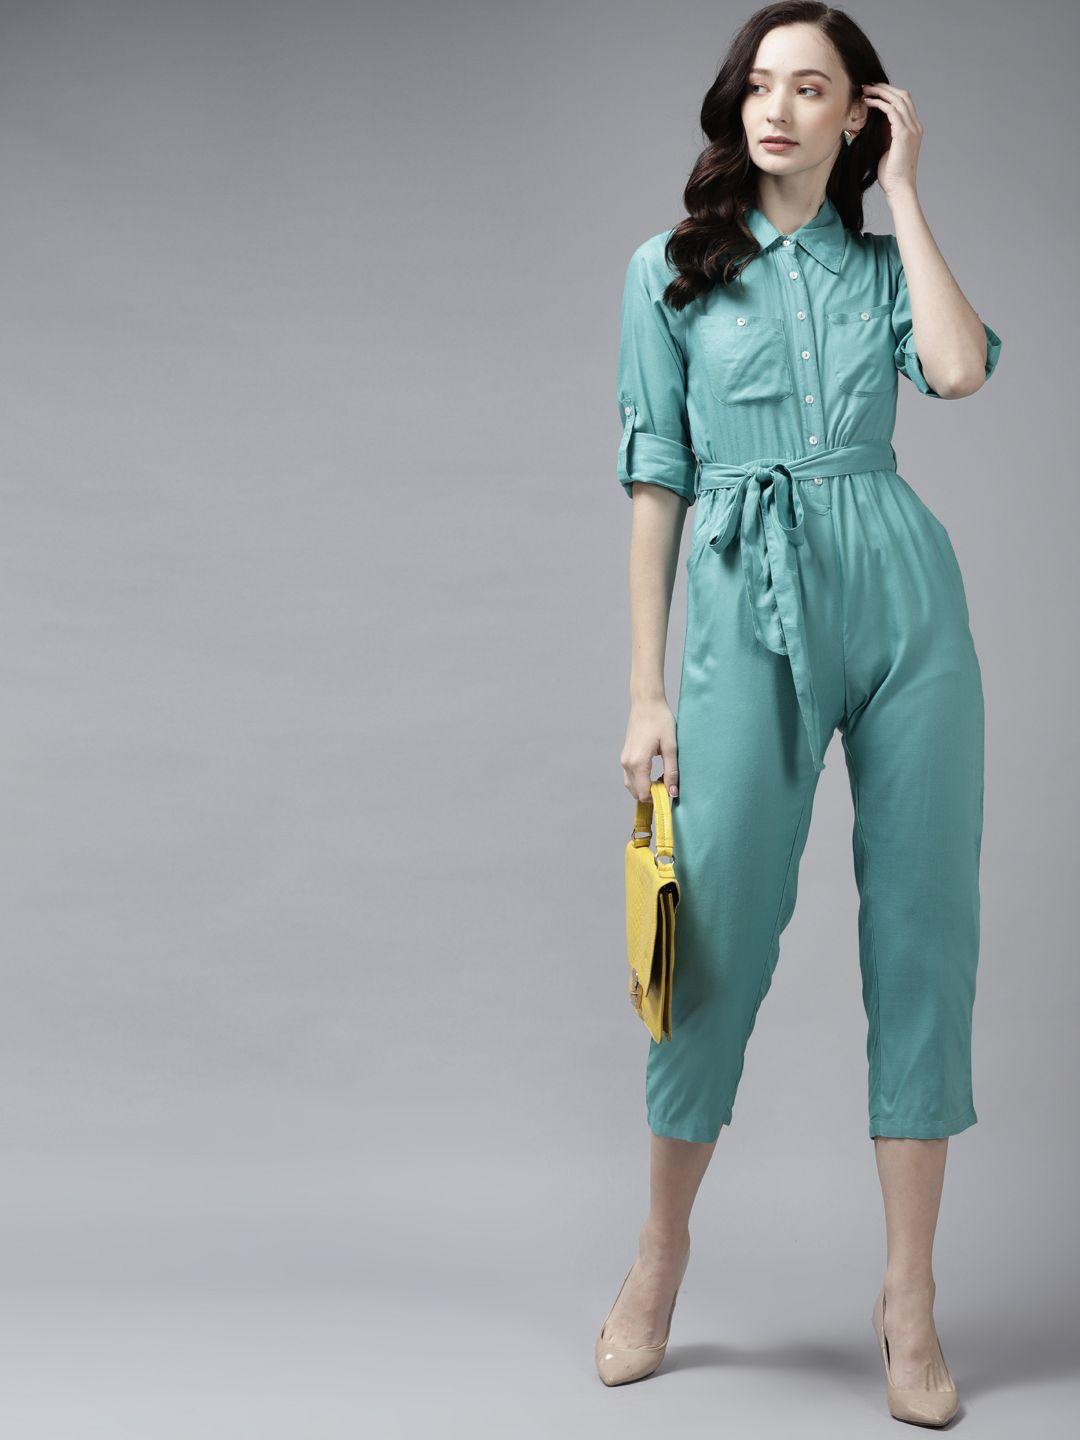 the-dry-state-turquoise-blue-shirt-collar-basic-jumpsuit